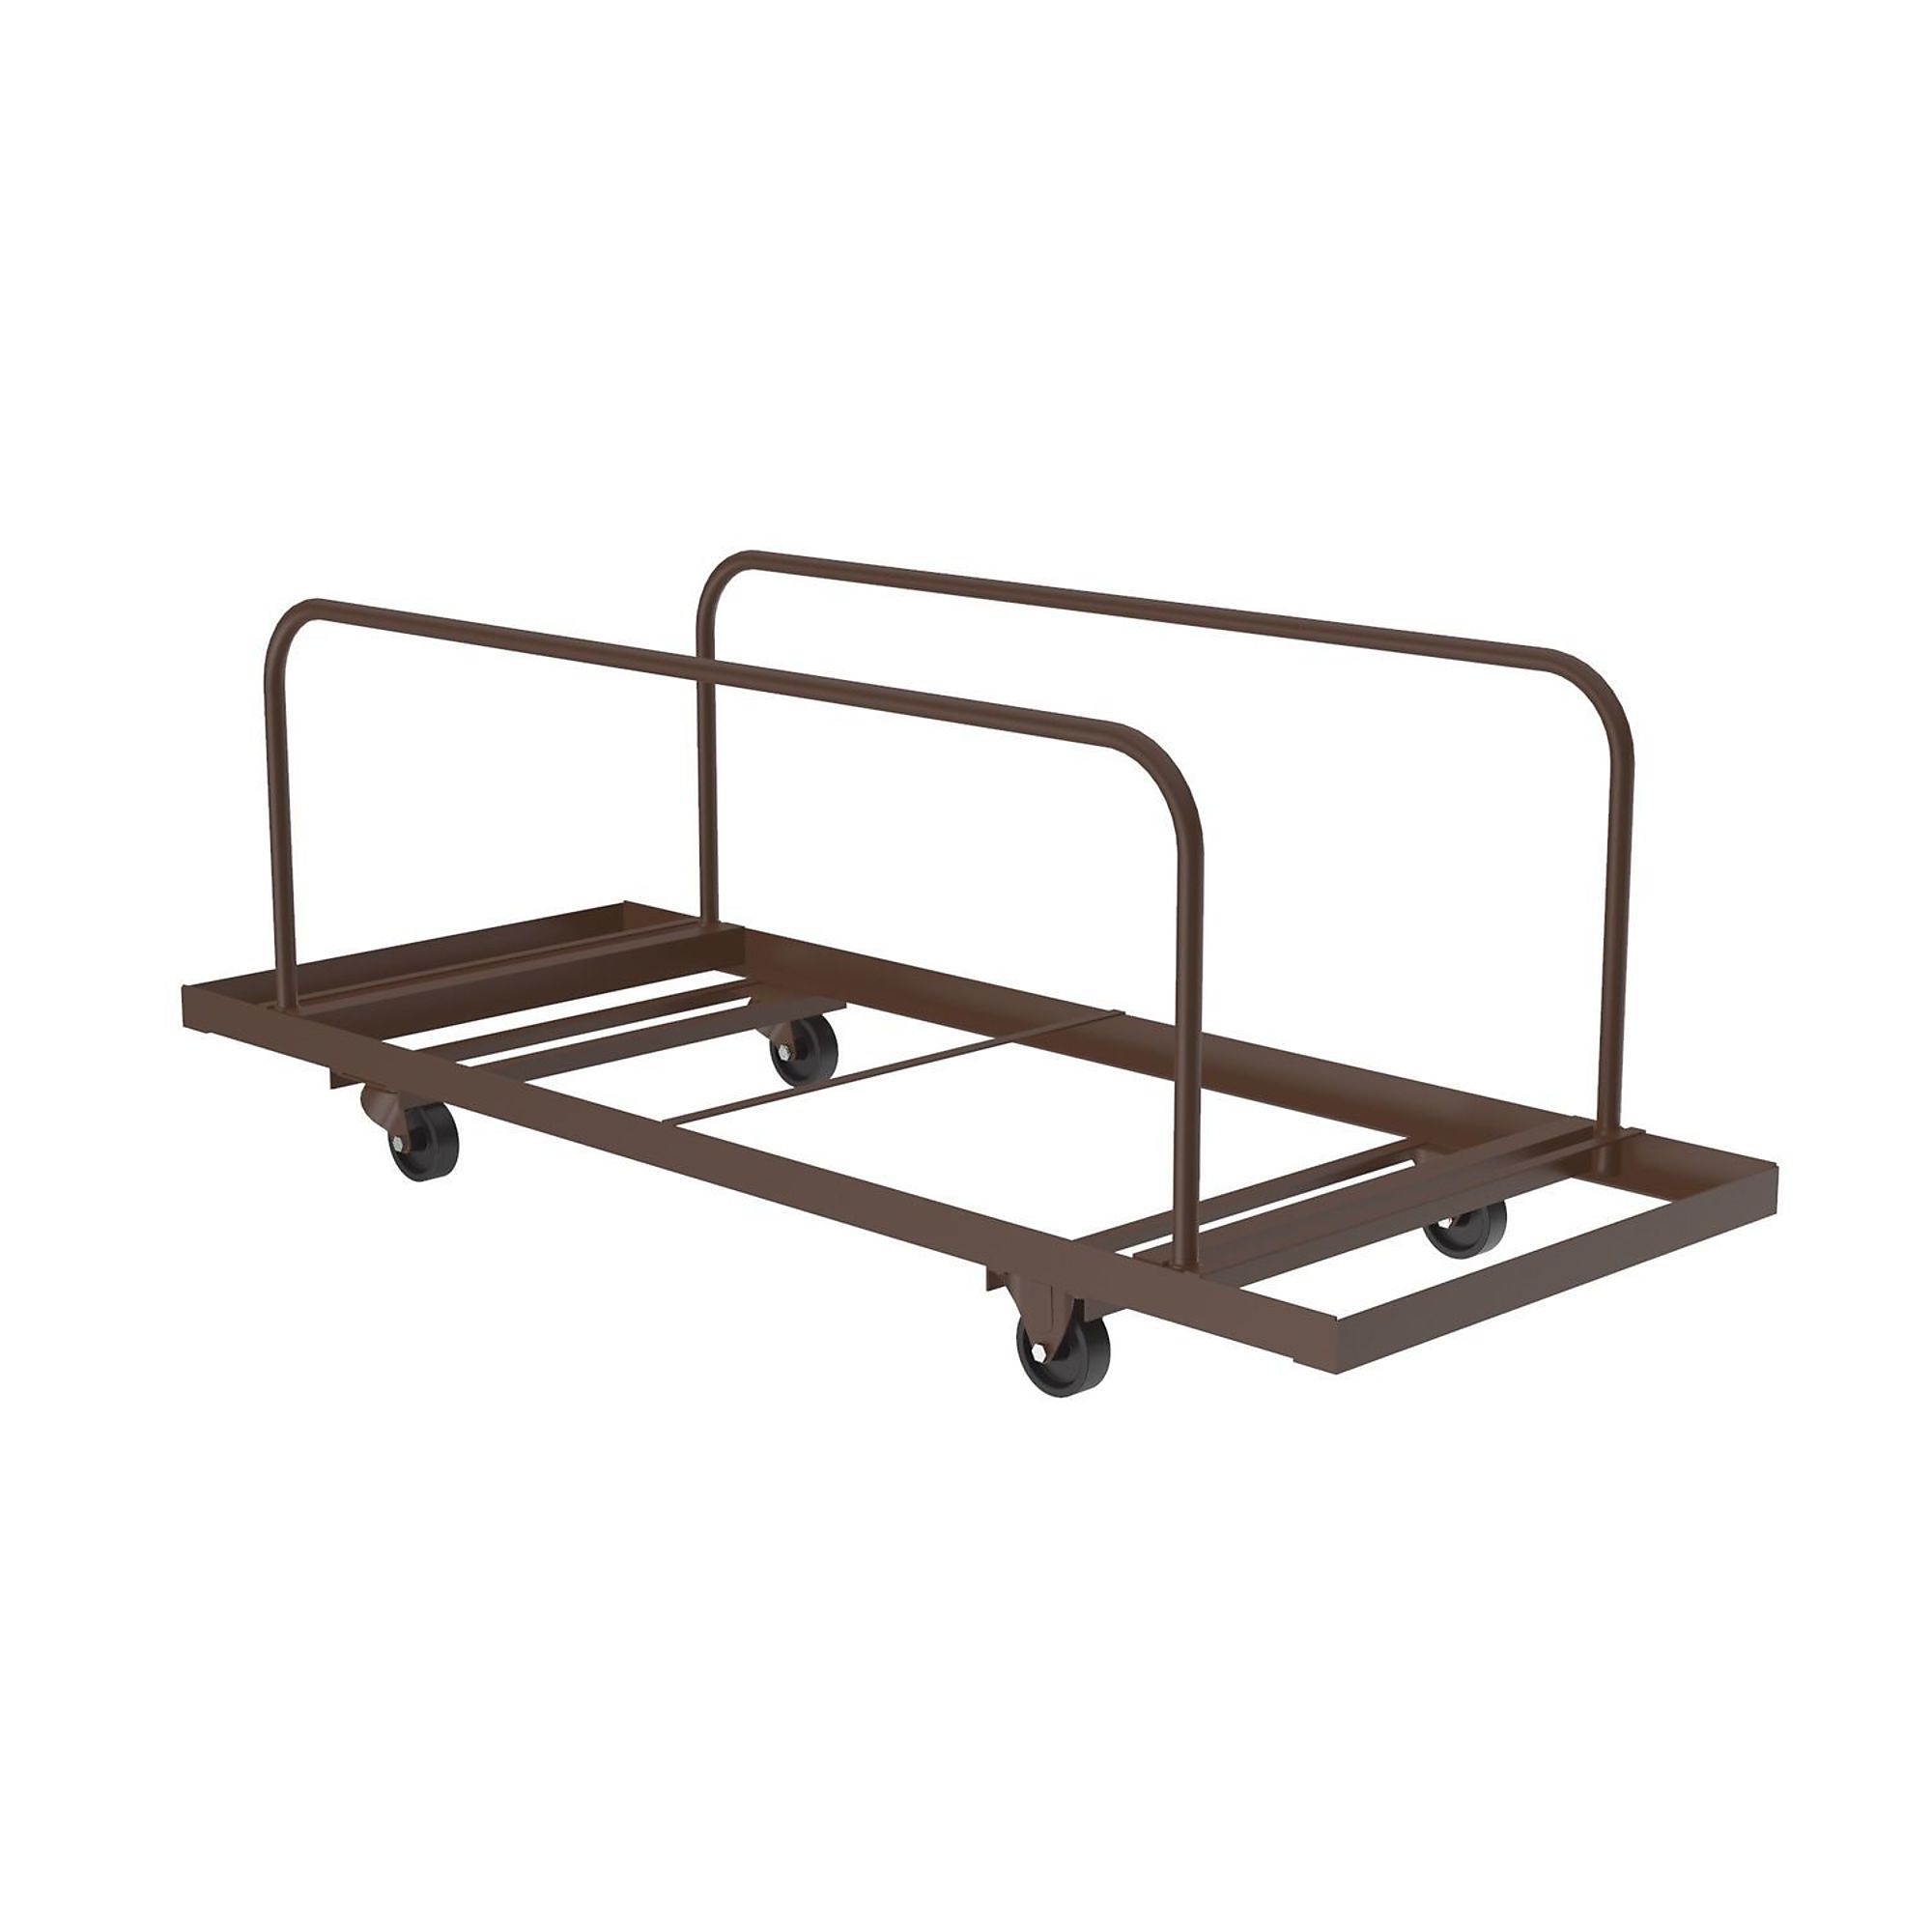 Correll, Truck for REC Tables up to 96Inch, Stacks up to 10, Capacity 10 lb, Frame Material Steel, Single, Pair, or Set Single, Model T288-01